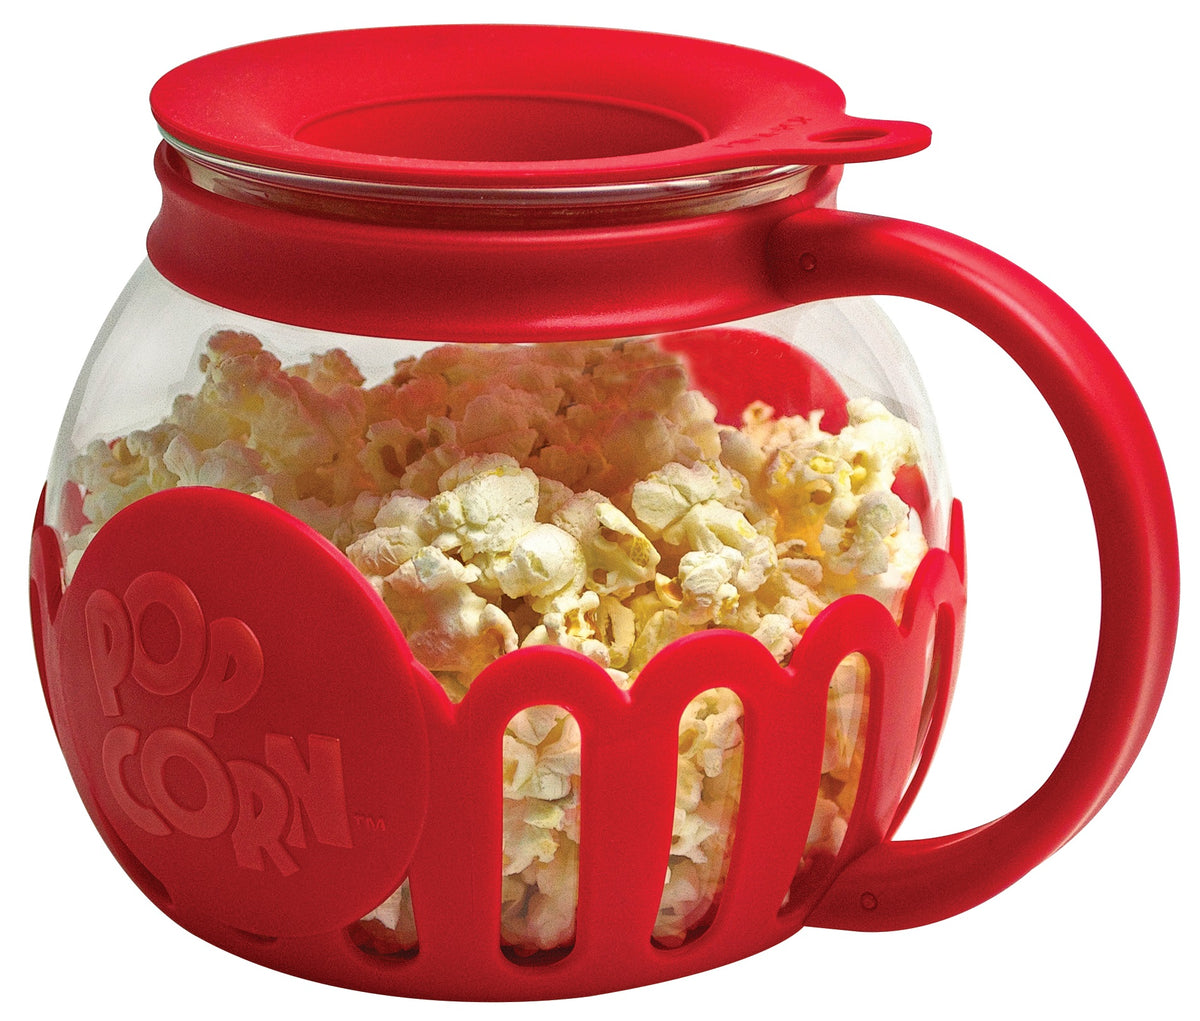 Primula 1526 Ecolution Snack Size Microwave Popcorn Popper, Red/Clear